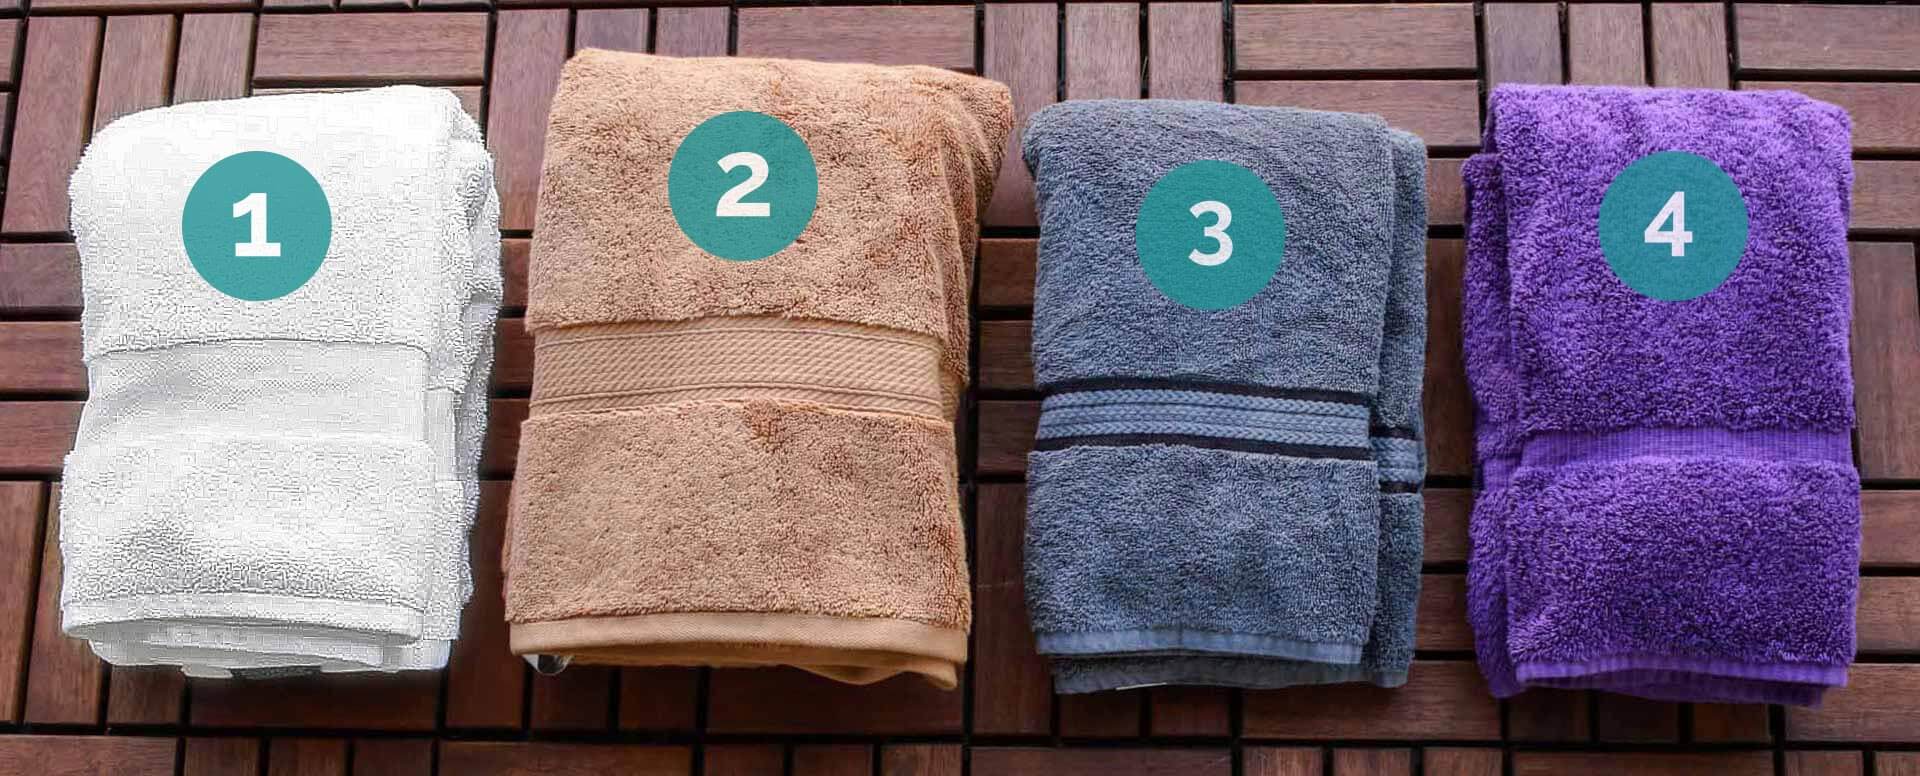 1 Piece 100 x 150 cm Orpheebs Towels and Bath Sheets Various Sizes 660 g/m2 100% Combed Cotton and Zero Twist Hotel Spa Threads 